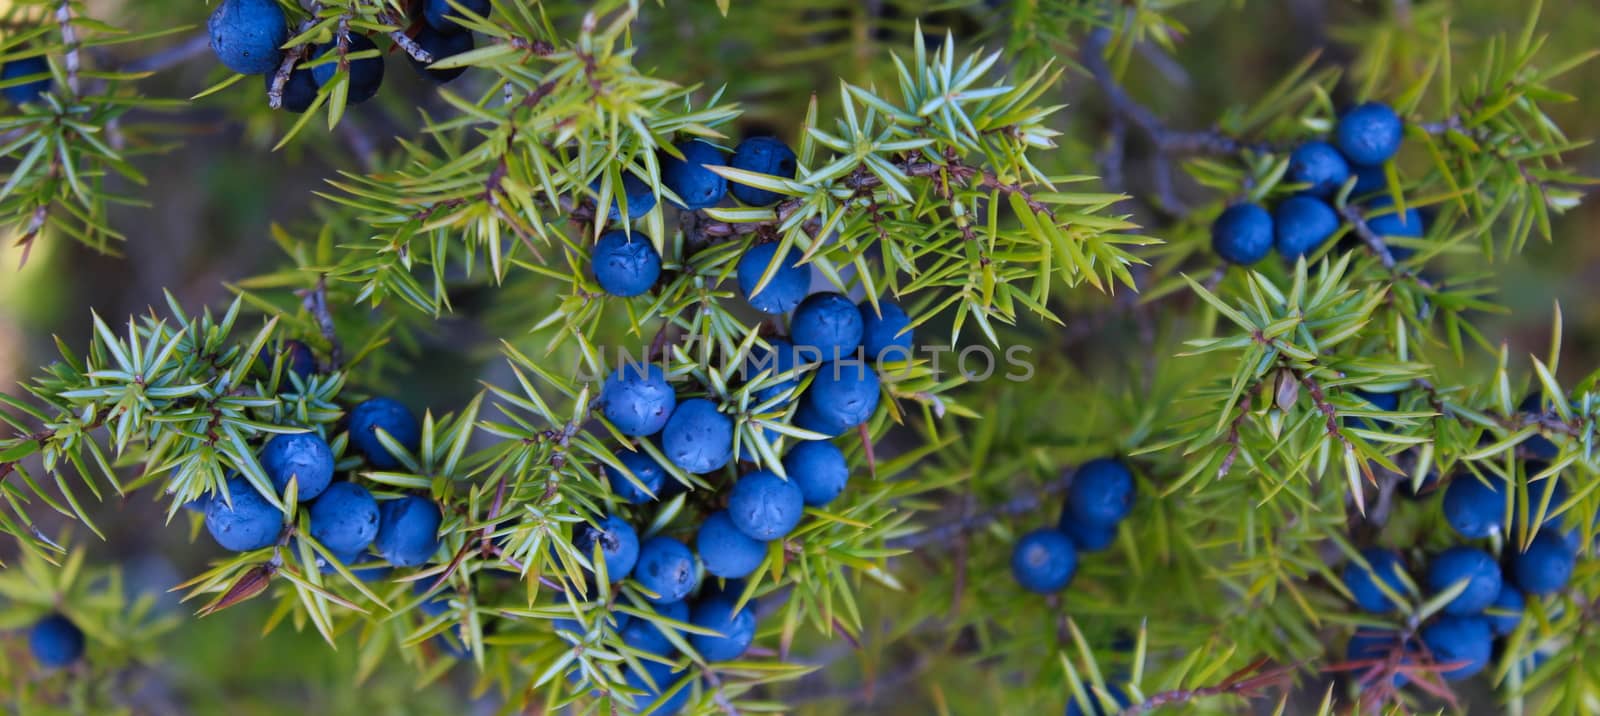 Juniperus communis fruit. Banner of lots of ripe navy blue juniper berries all over the branch between the green needles. by mahirrov